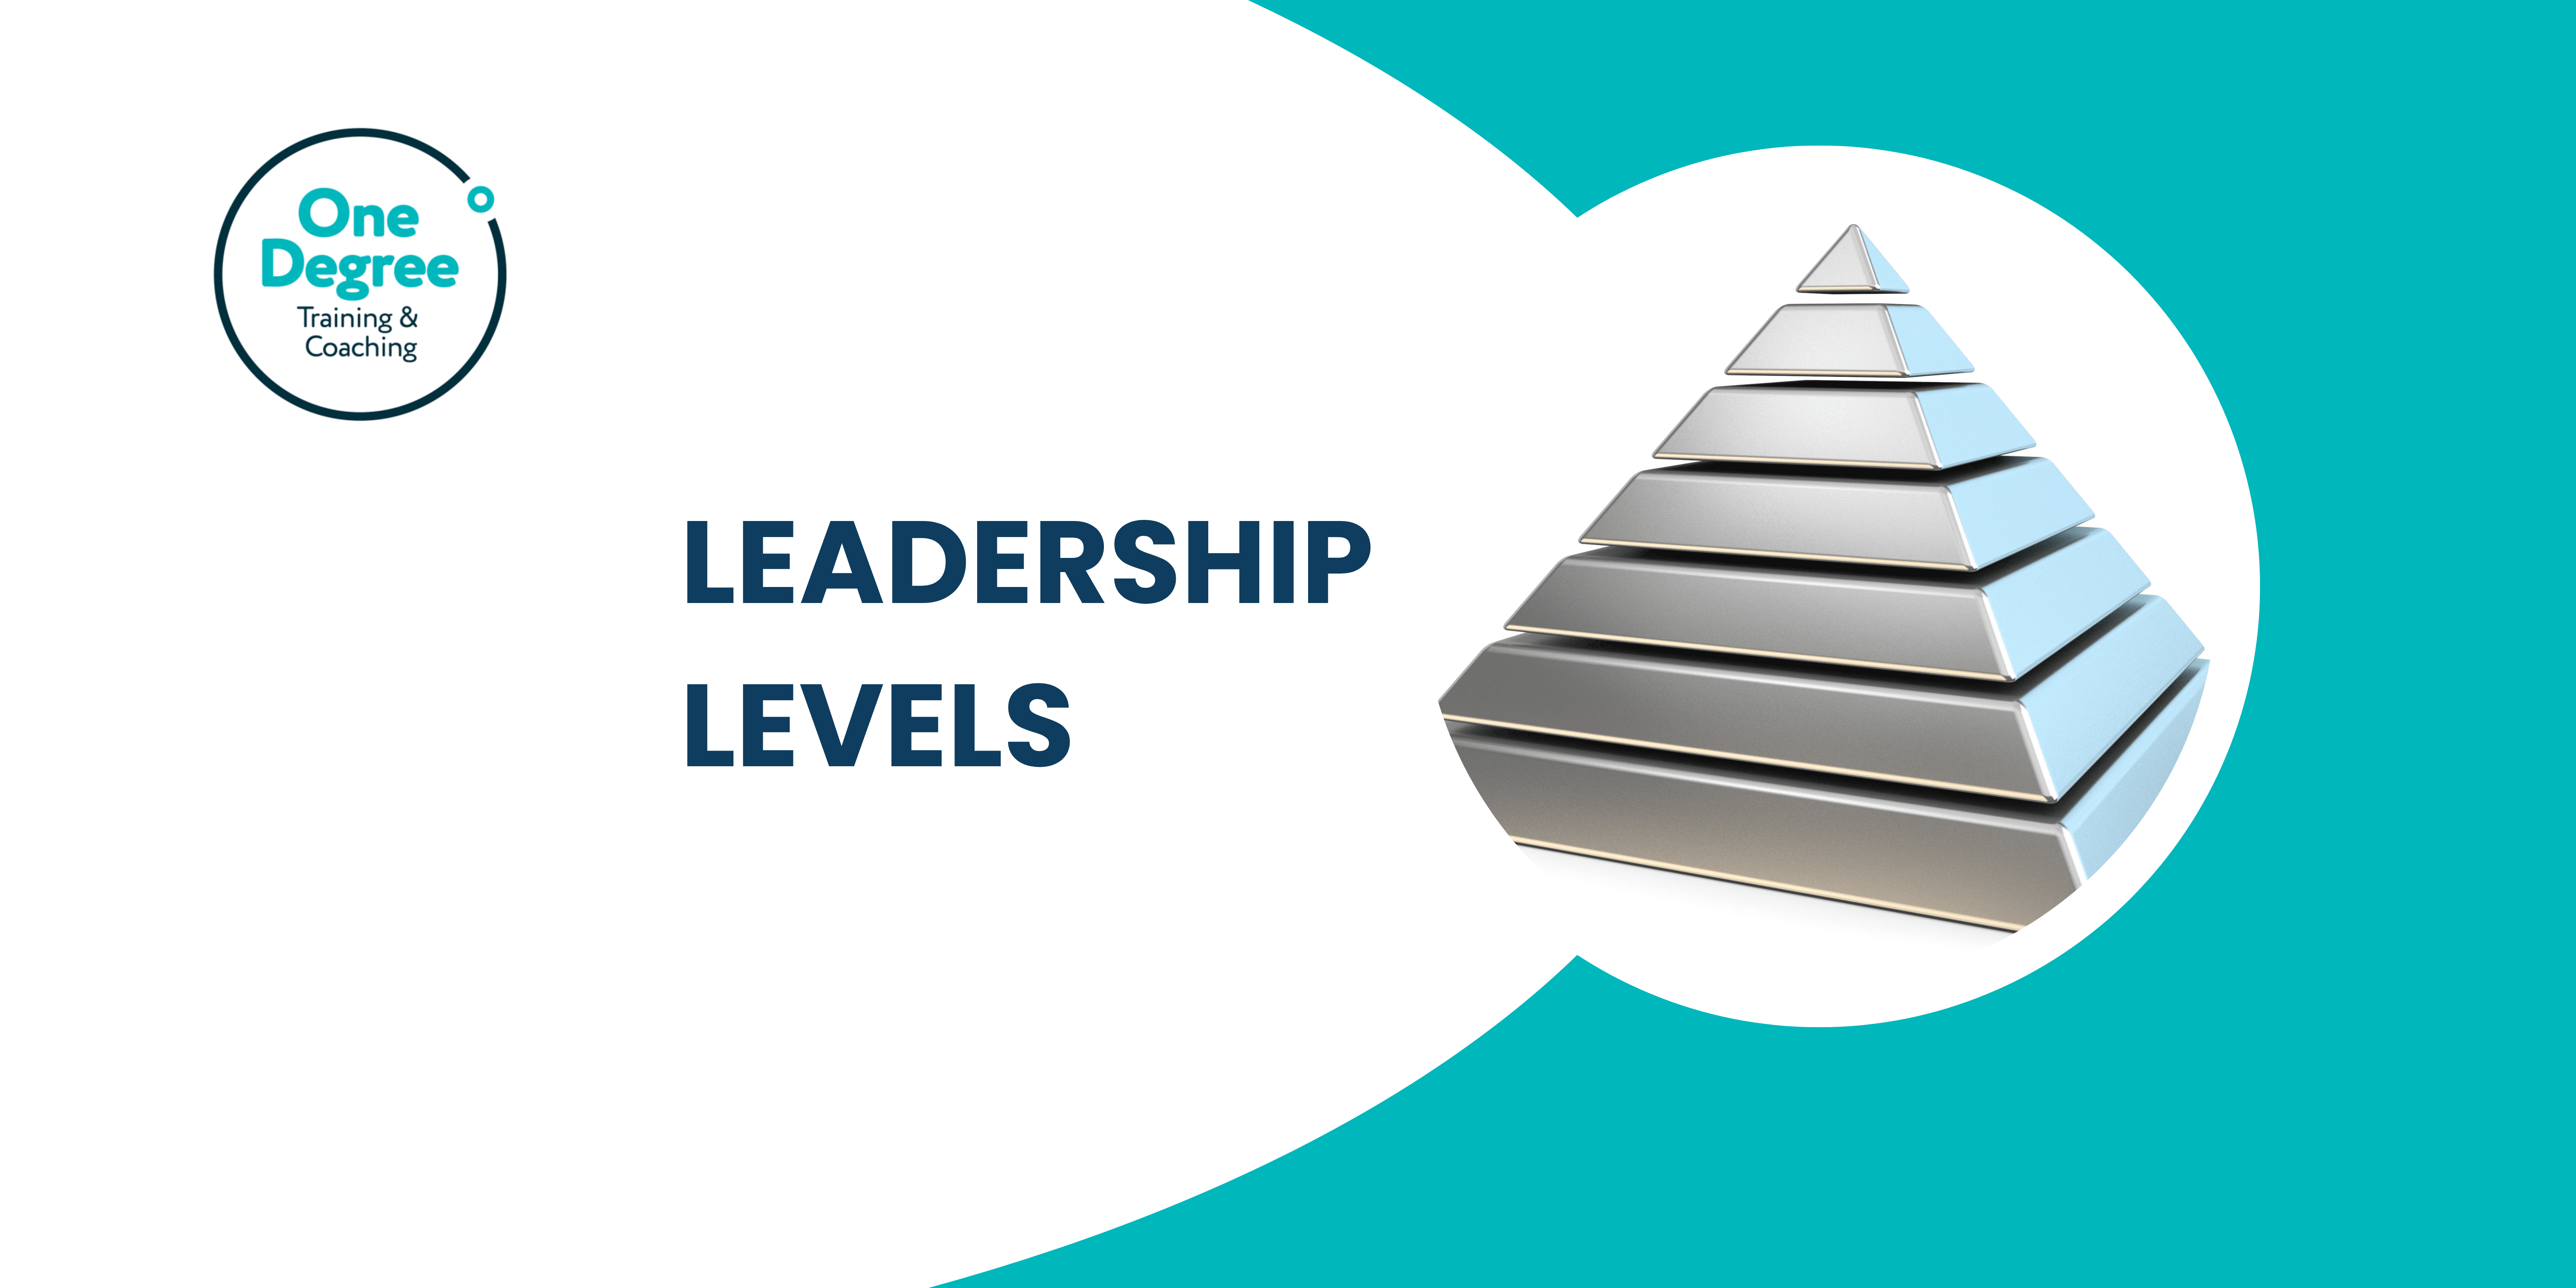 When to introduce a new level of leadership?